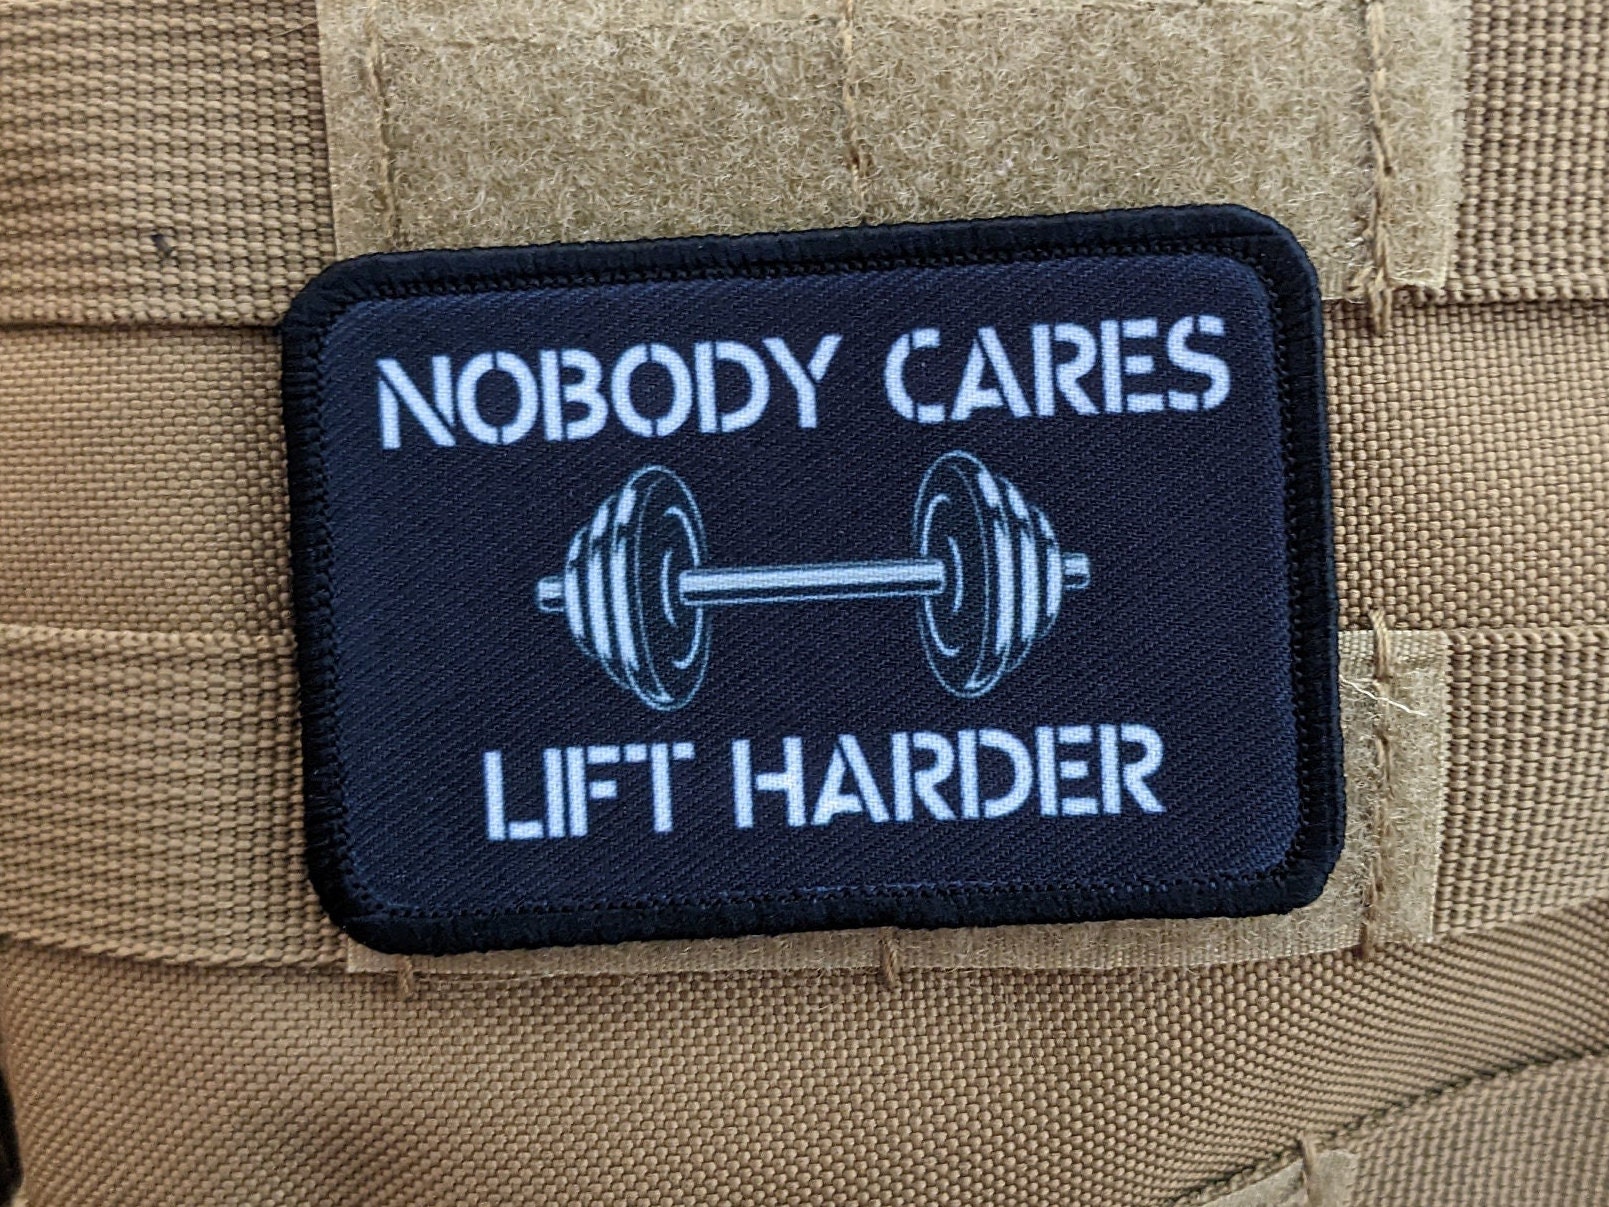 Doing it for the Gram Instagram funny fitness gym morale patch